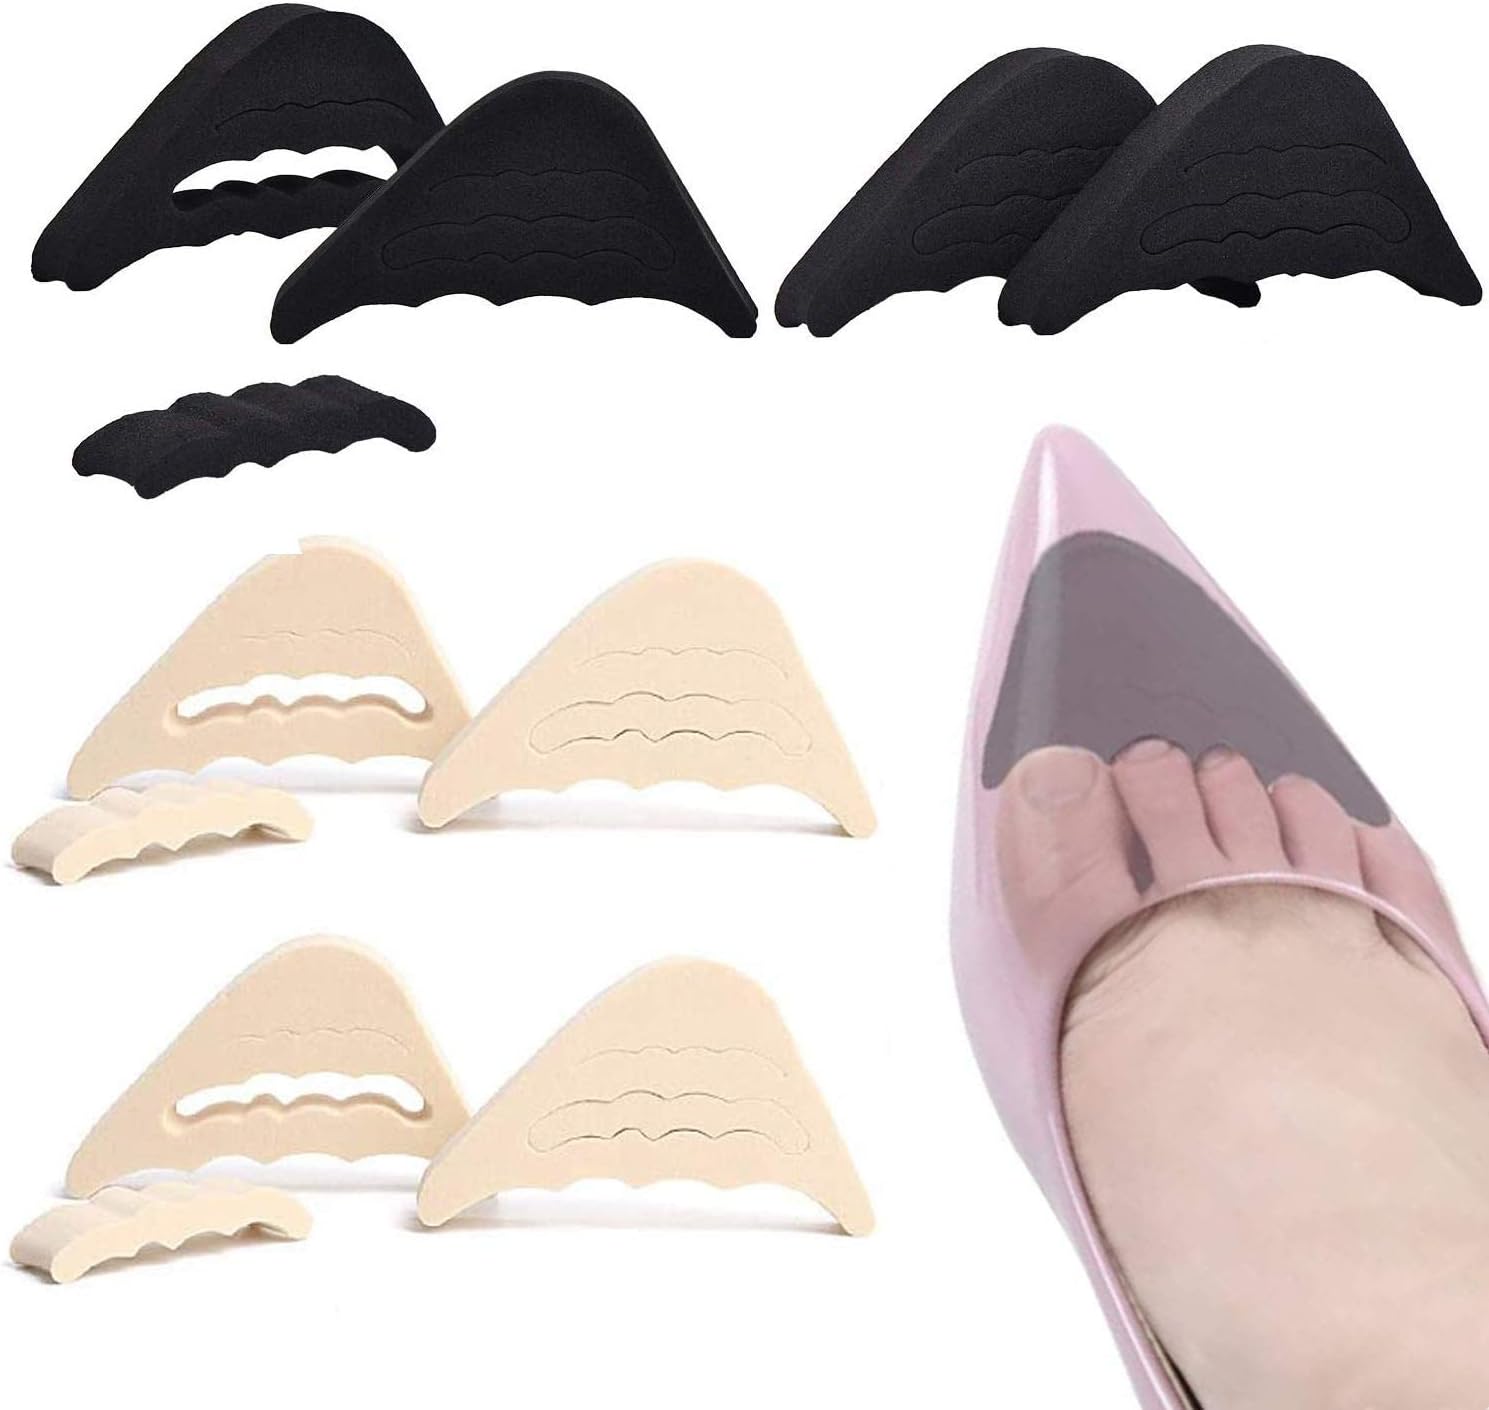 Shoe Fillers, Toe Inserts for Shoes, 4 Pairs Shoe [...]